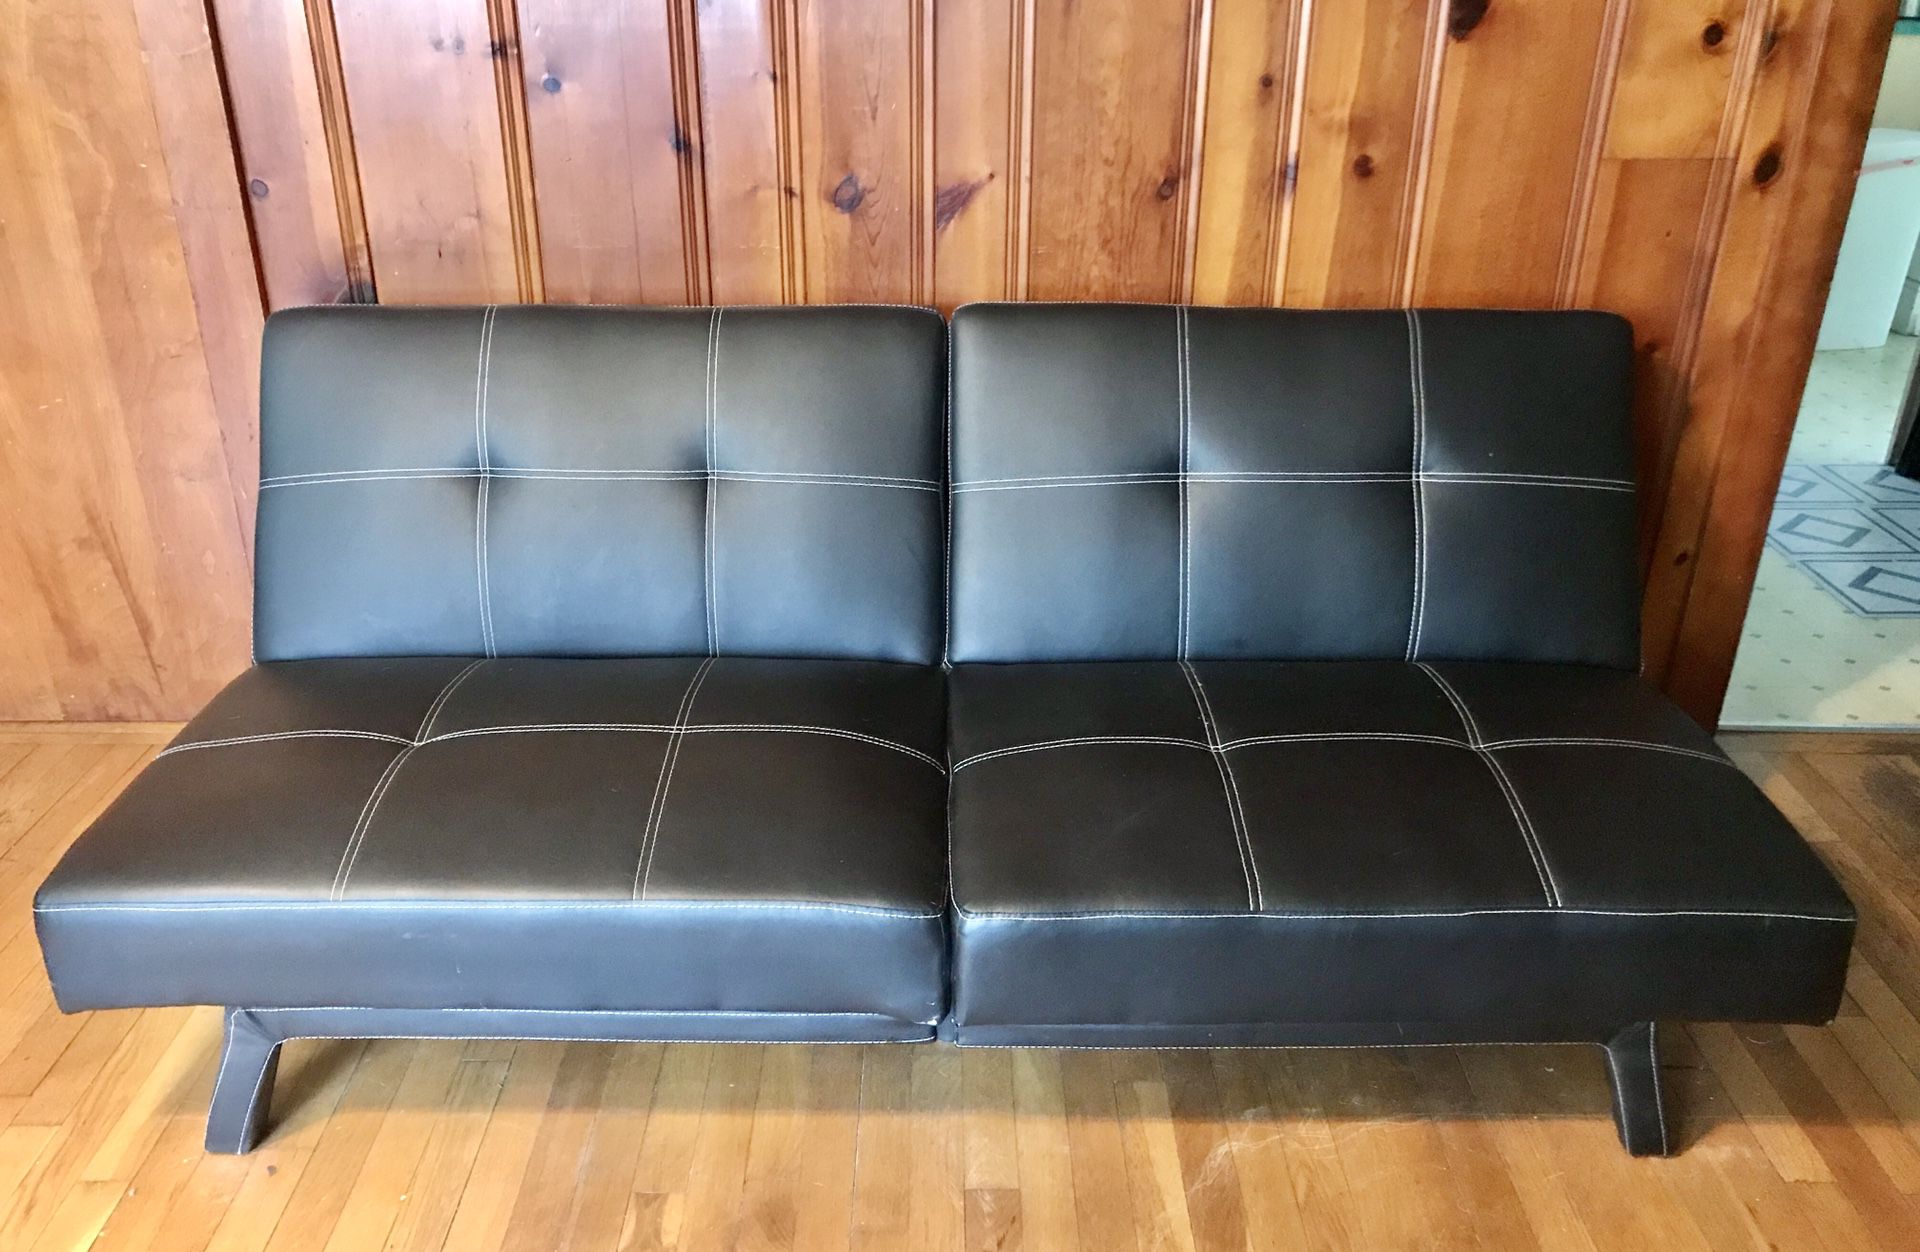 MOVING! MUST GO. Buy One Get One Free Black Faux Leather Futon Sleepers